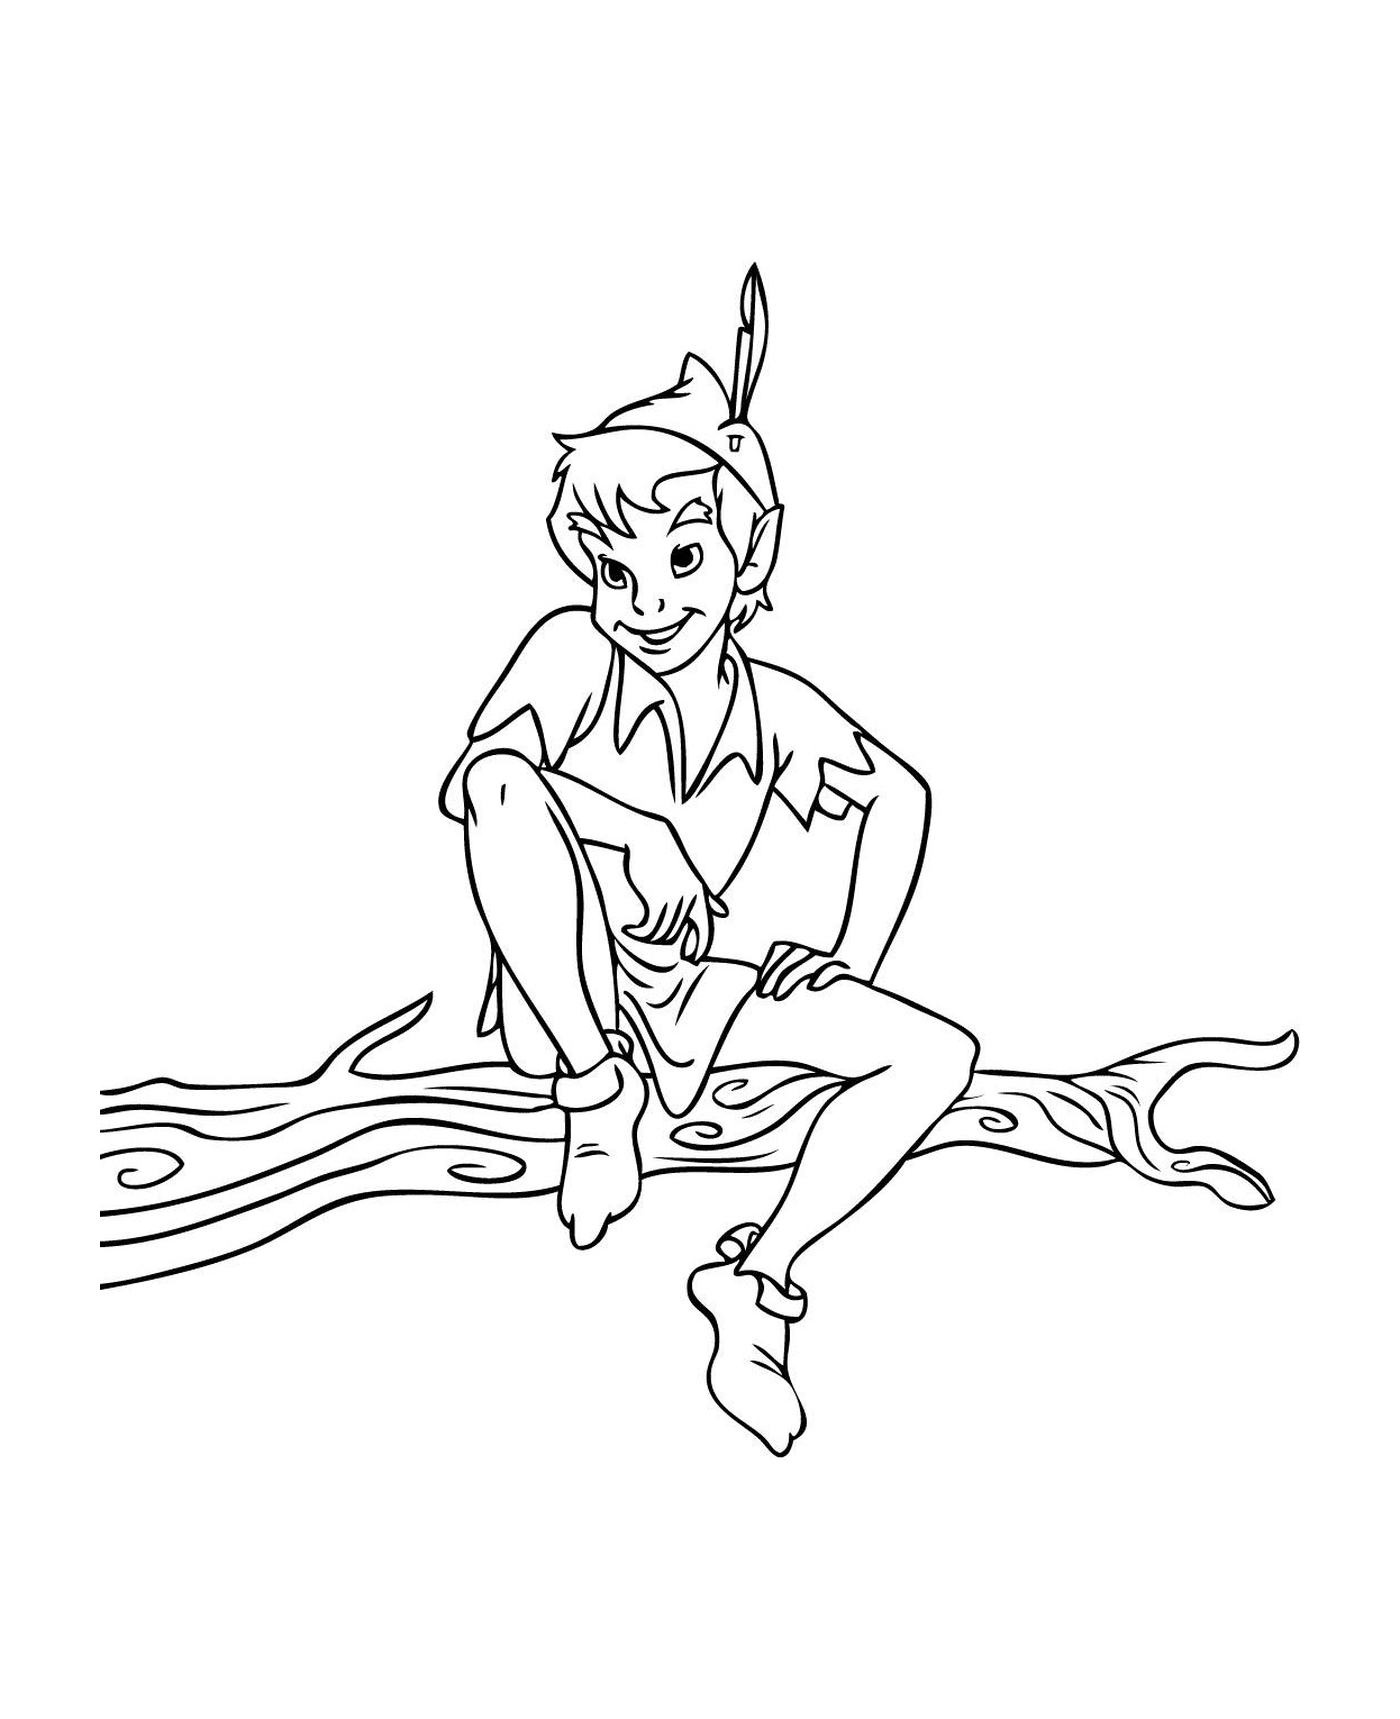  Peter Pan sitting on a tree 